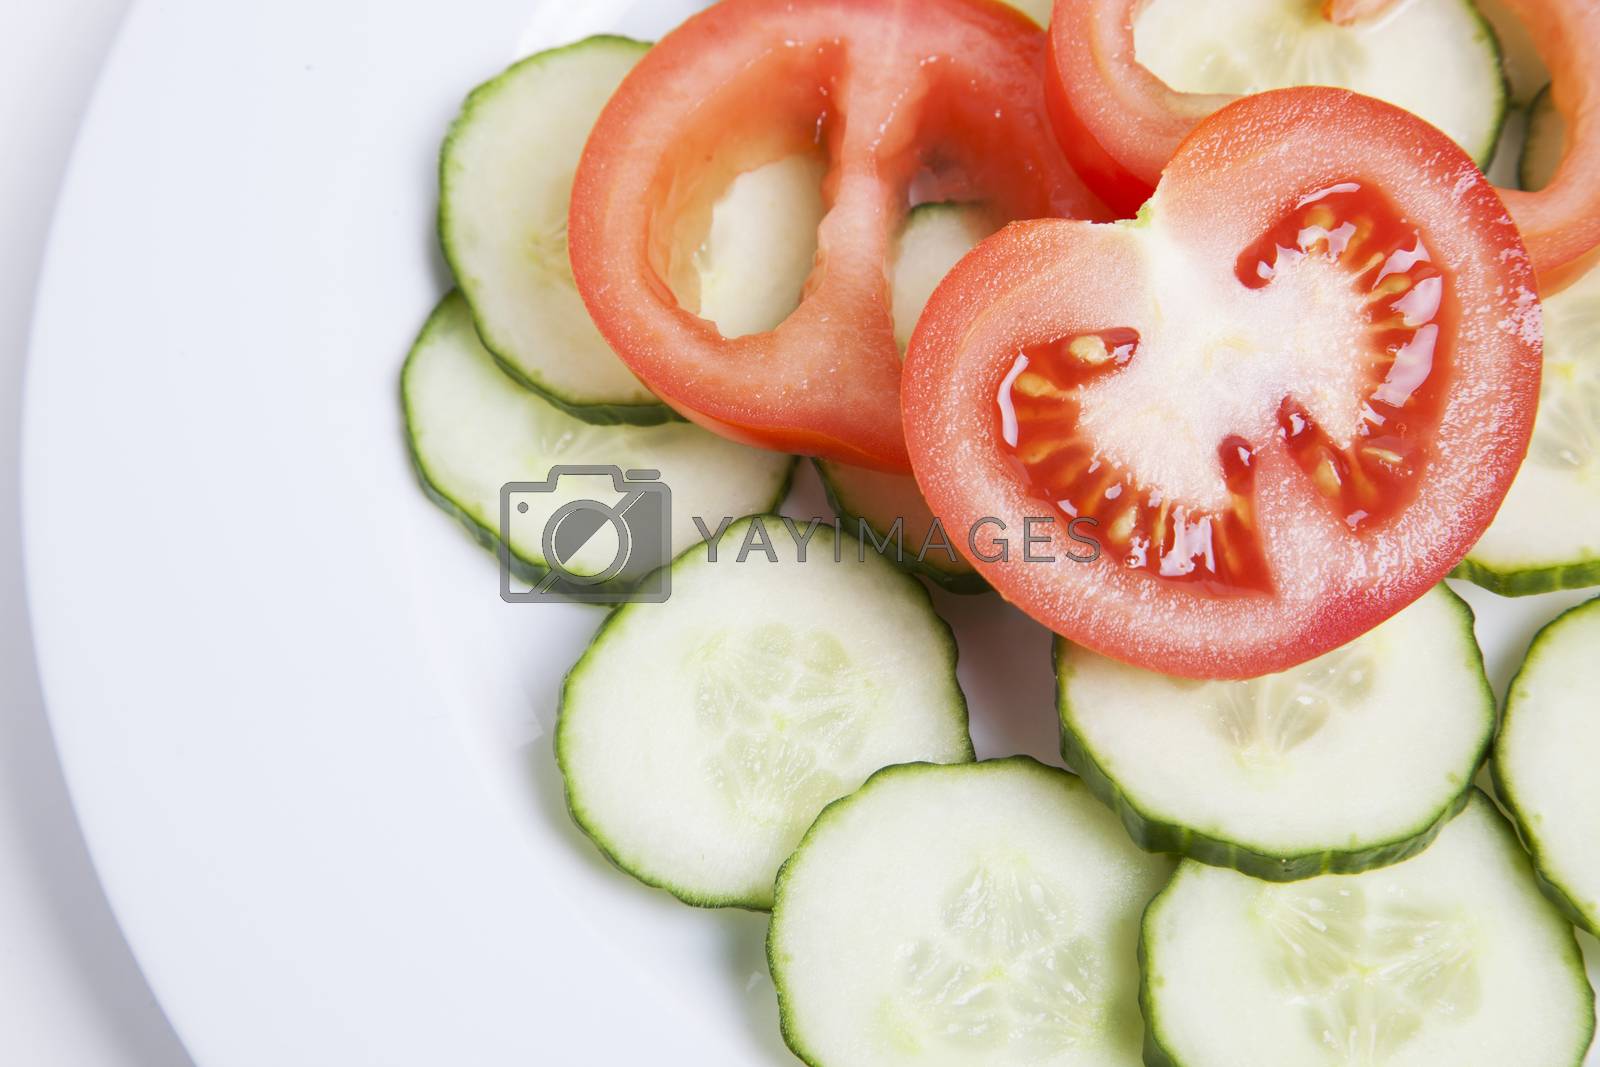 Royalty free image of Close-up of sliced tomatoes and cucumbers in plate by moodboard